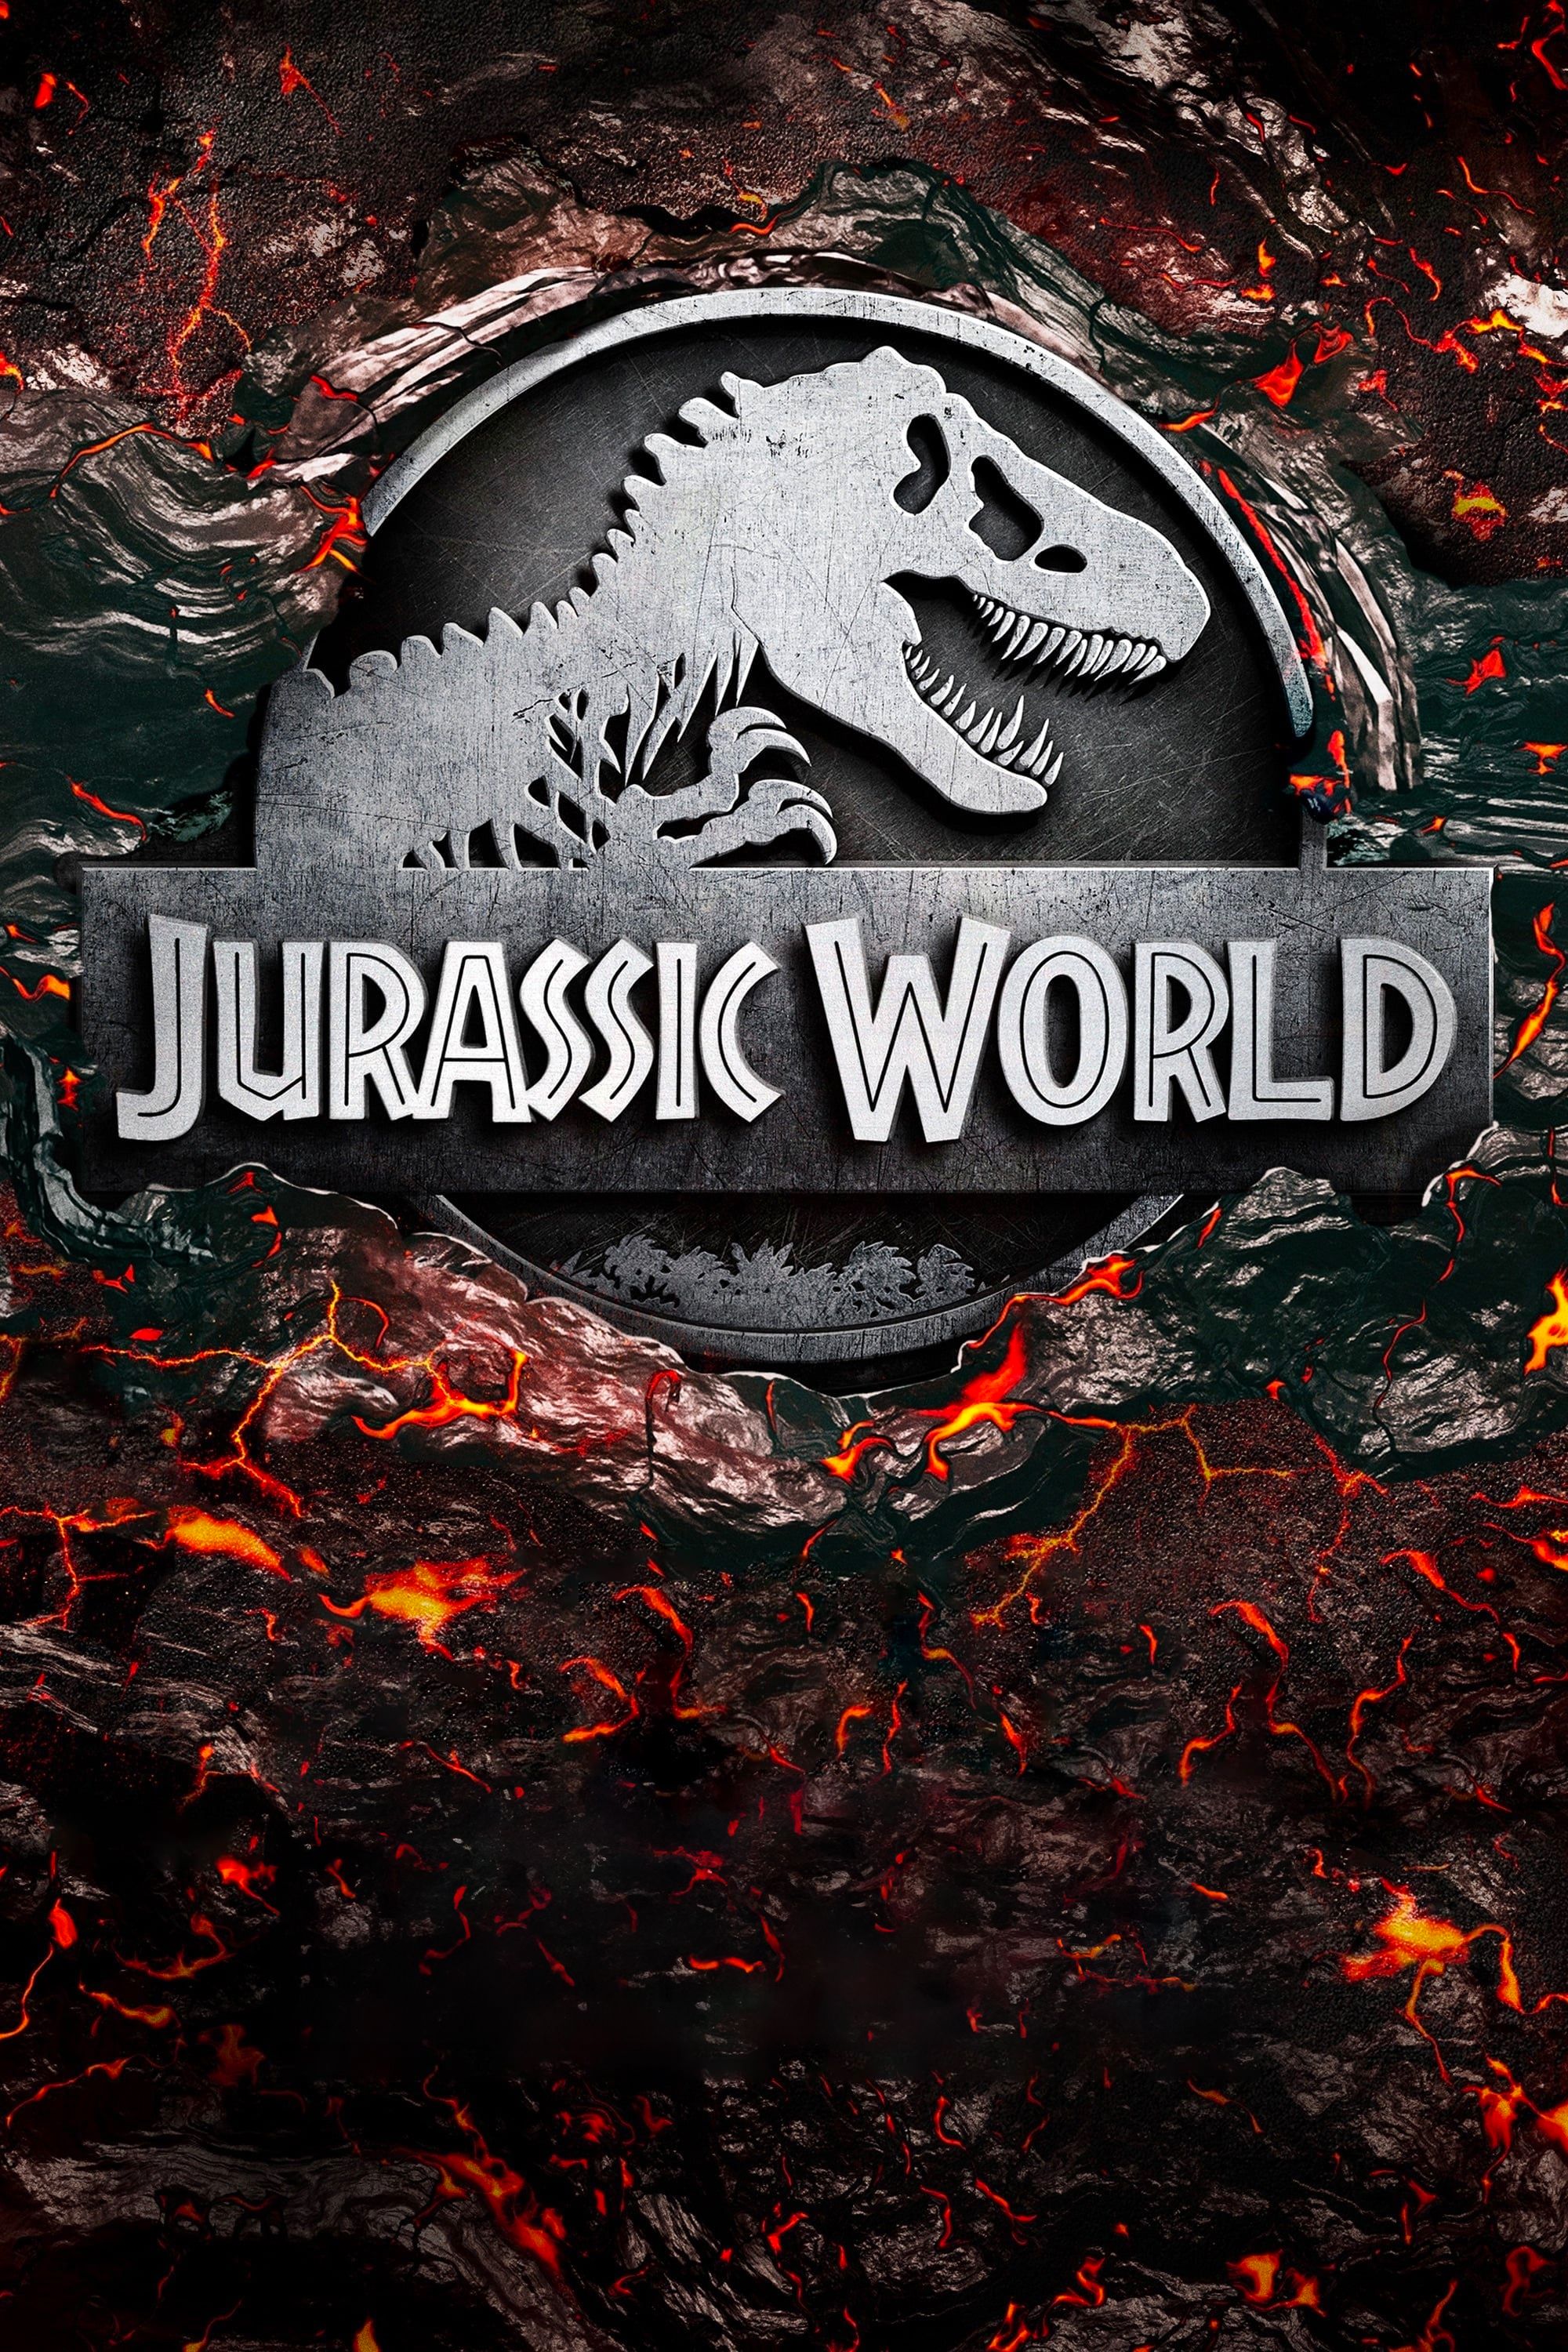 Jurassic World Movie Poster Showing the Dinosaur Logo Buried in Lava